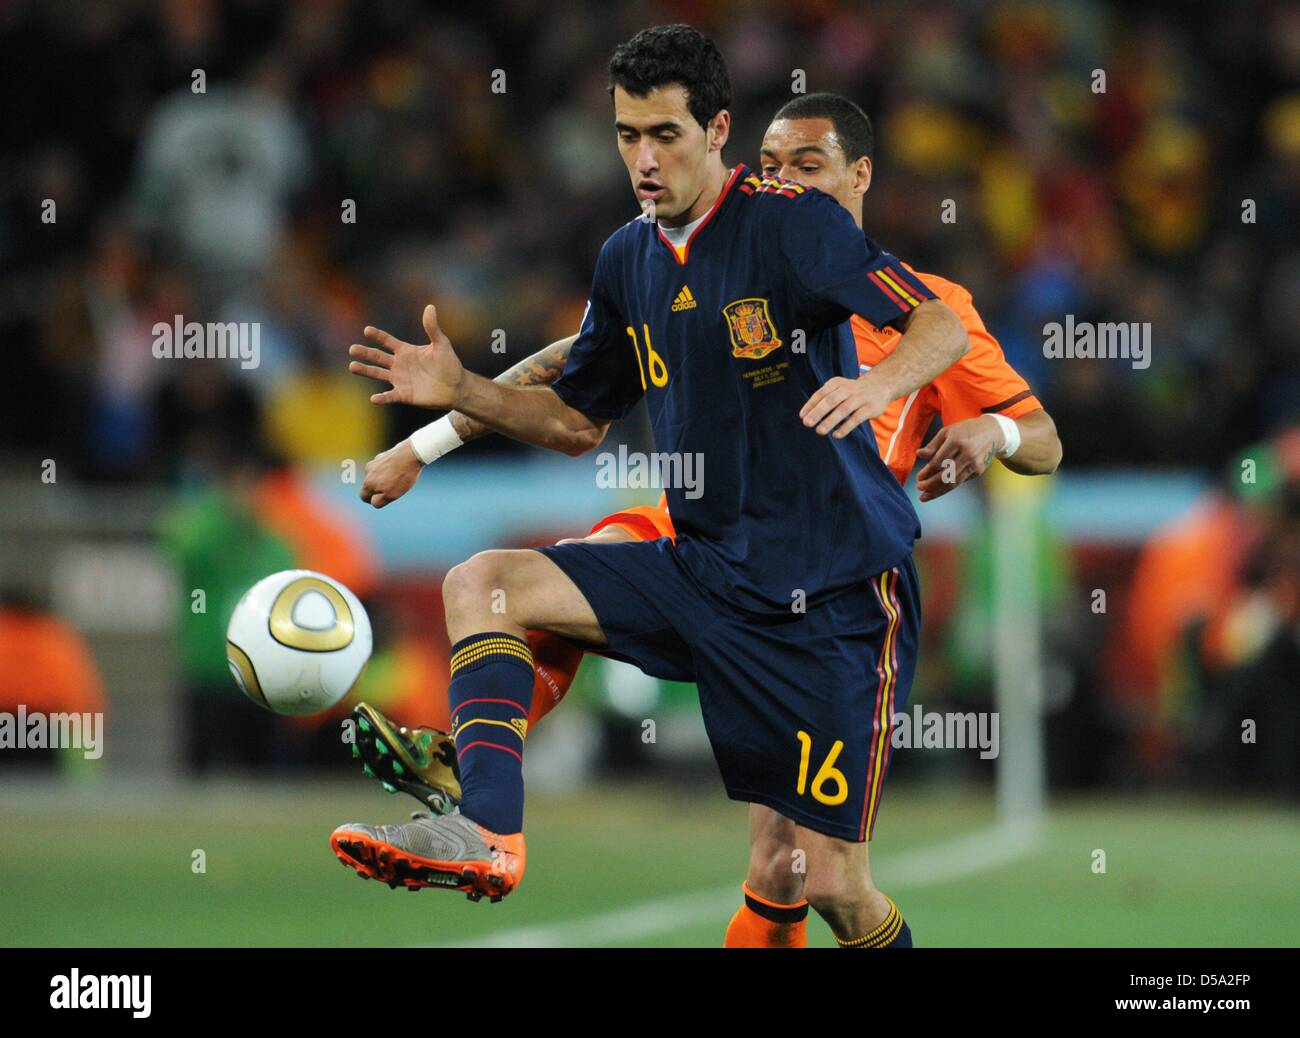 Sergio Busquets of Spain controls the ball during the 2010 FIFA World Cup final match between the Netherlands and Spain at the Soccer City Stadium in Johannesburg, South Africa 11 July 2010. Photo: Bernd Weissbrod dpa - Please refer to http://dpaq.de/FIFA-WM2010-TC Stock Photo